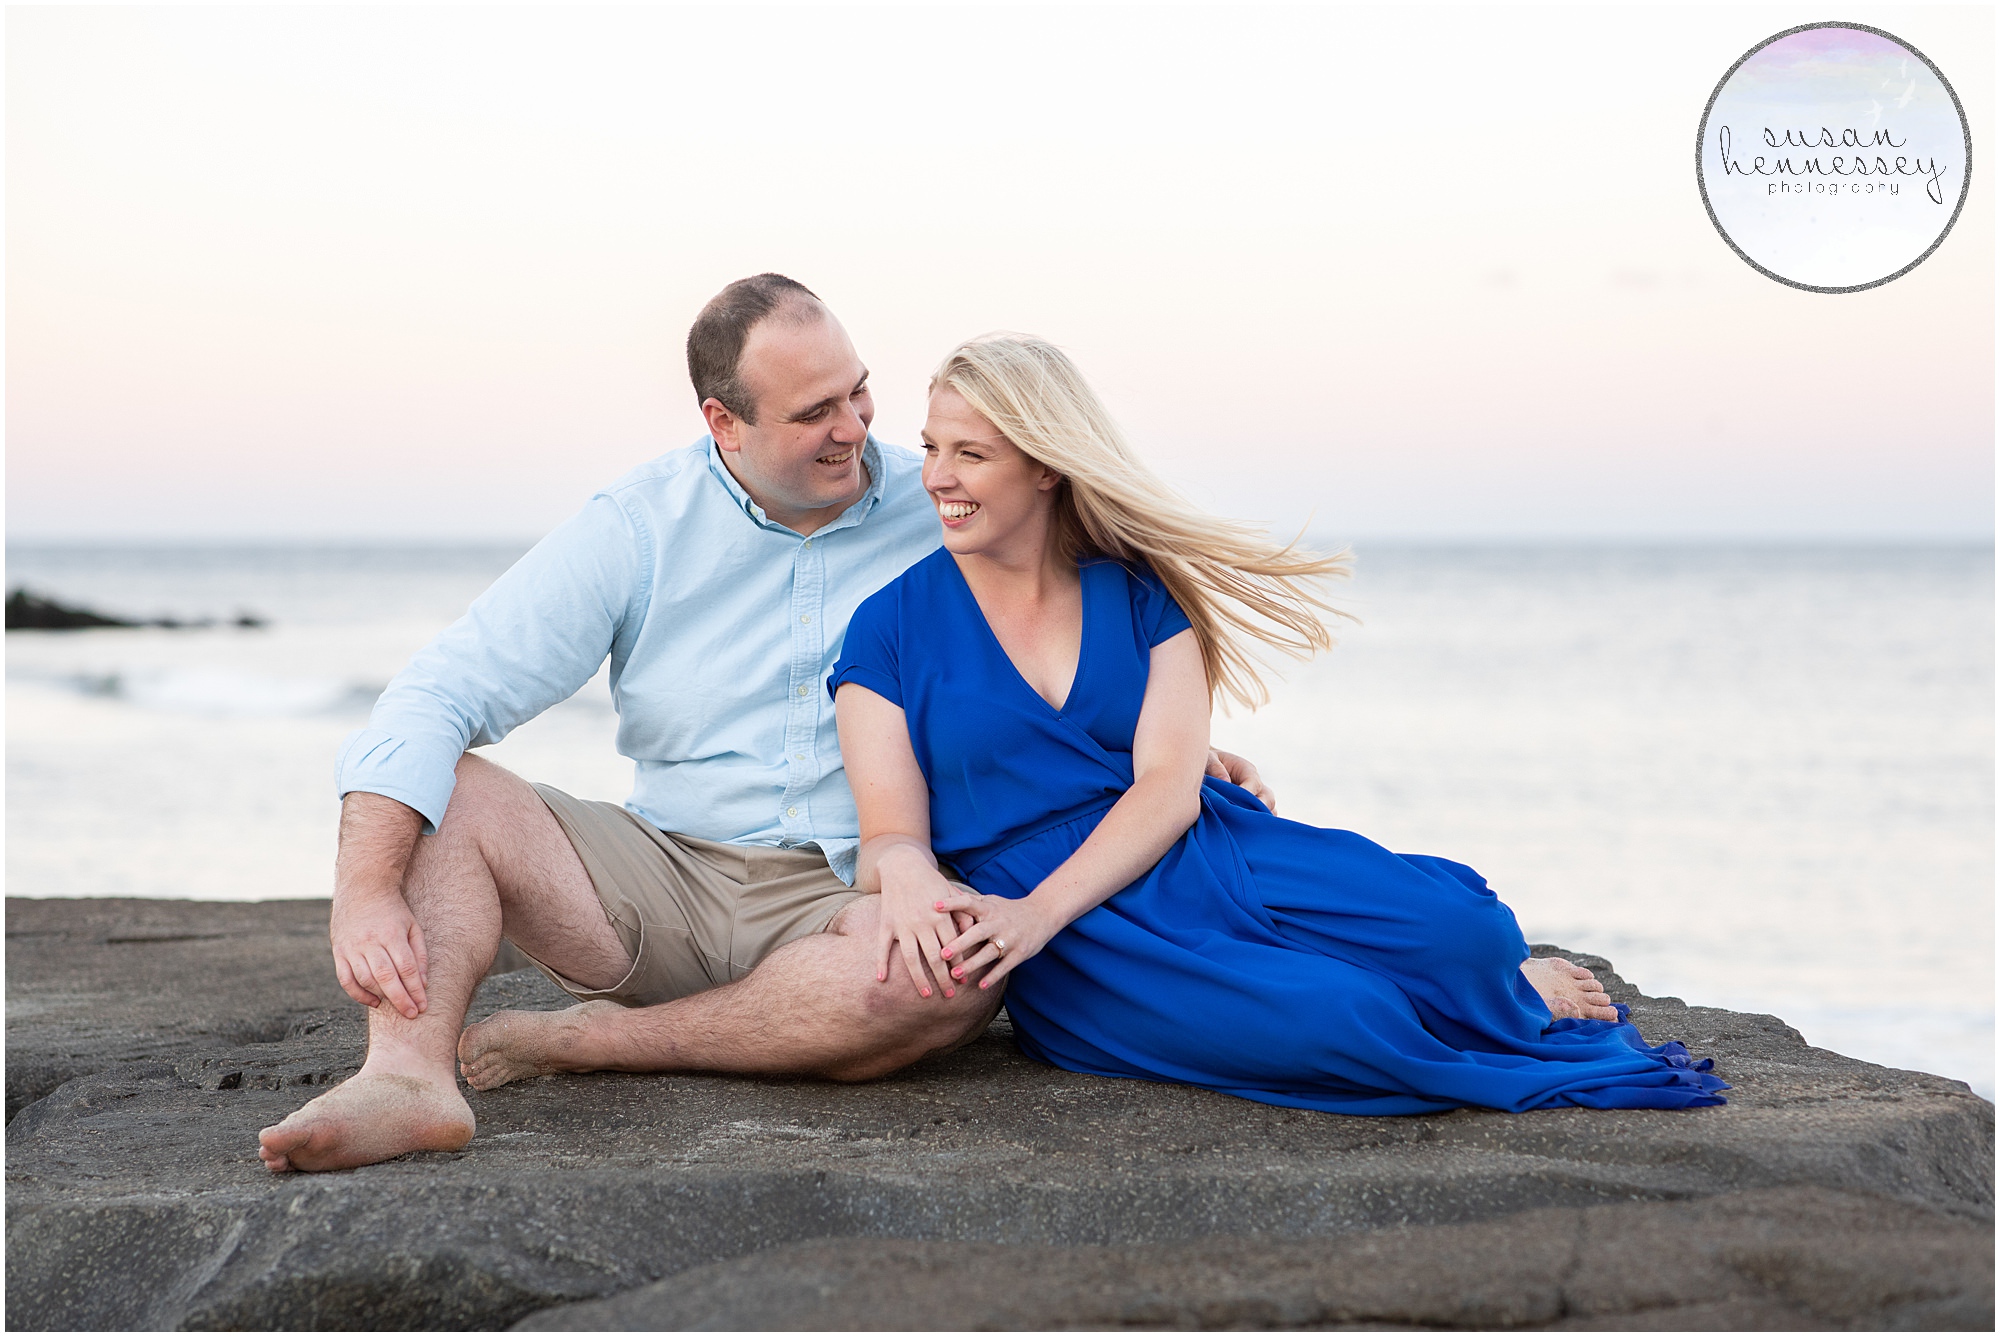 Happily engaged couple on the rocks at their Engagement Session at Asbury Park